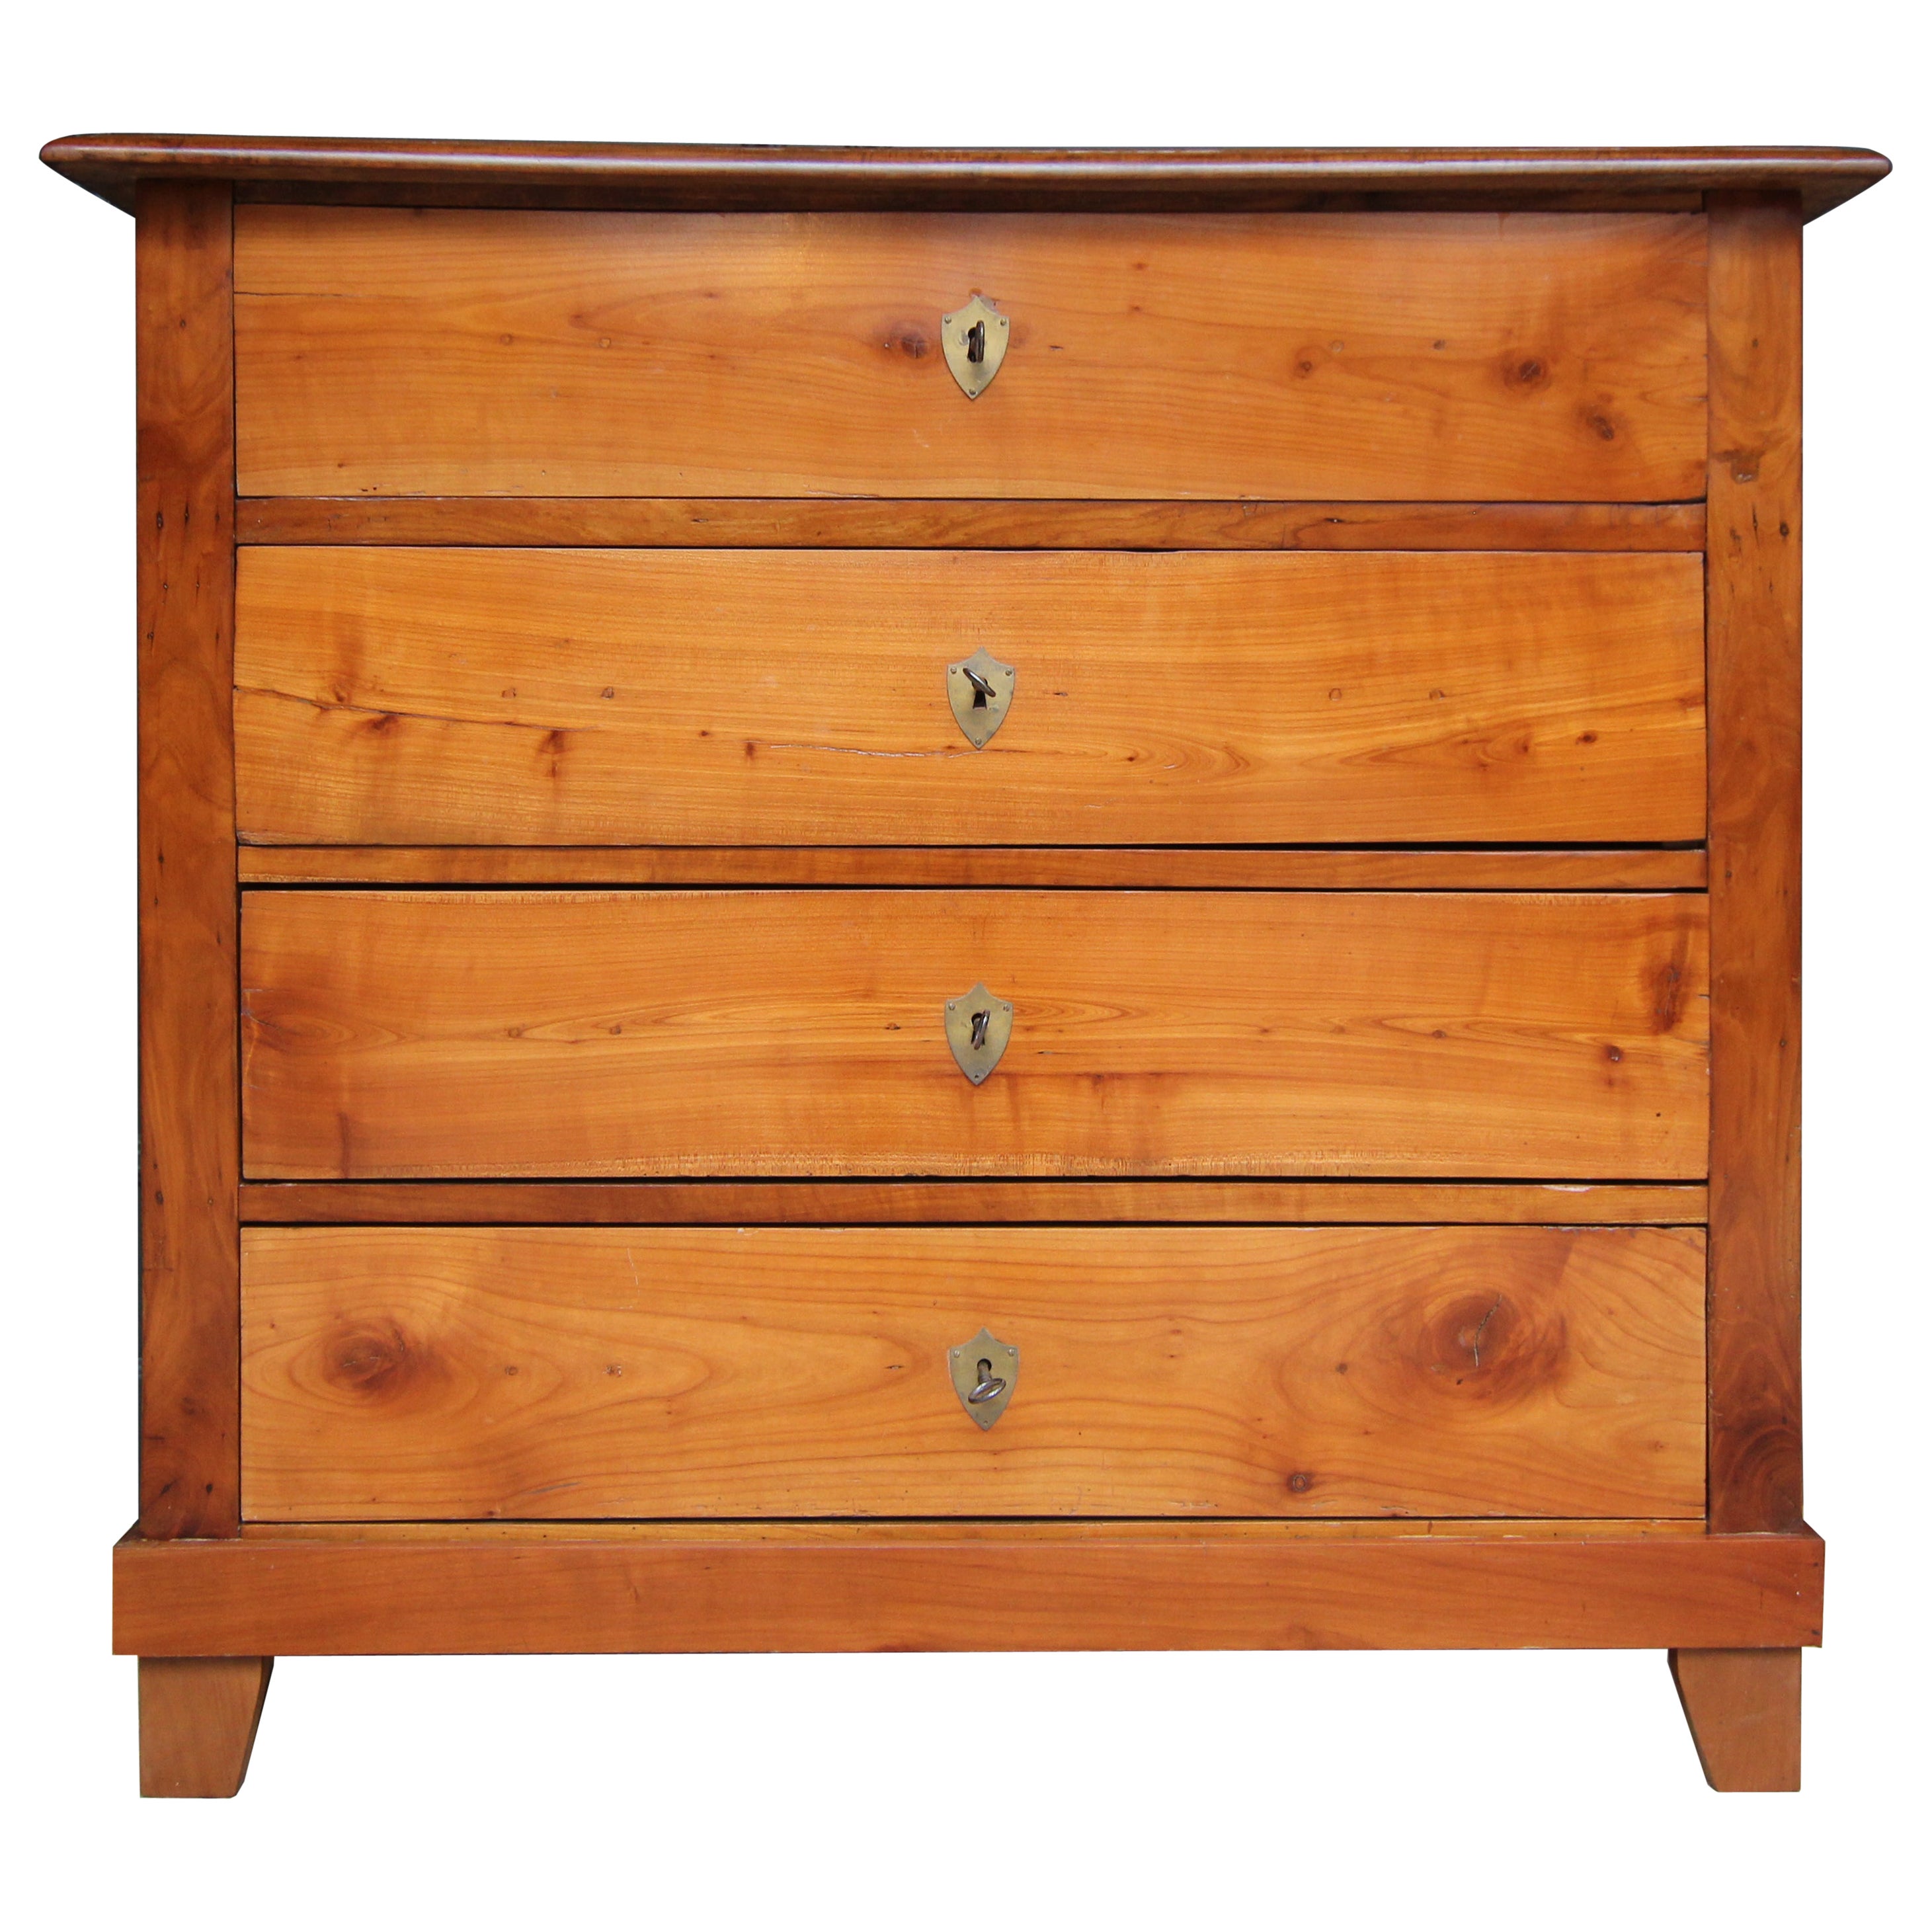 19th Century German Cherrywood Chest of Drawers